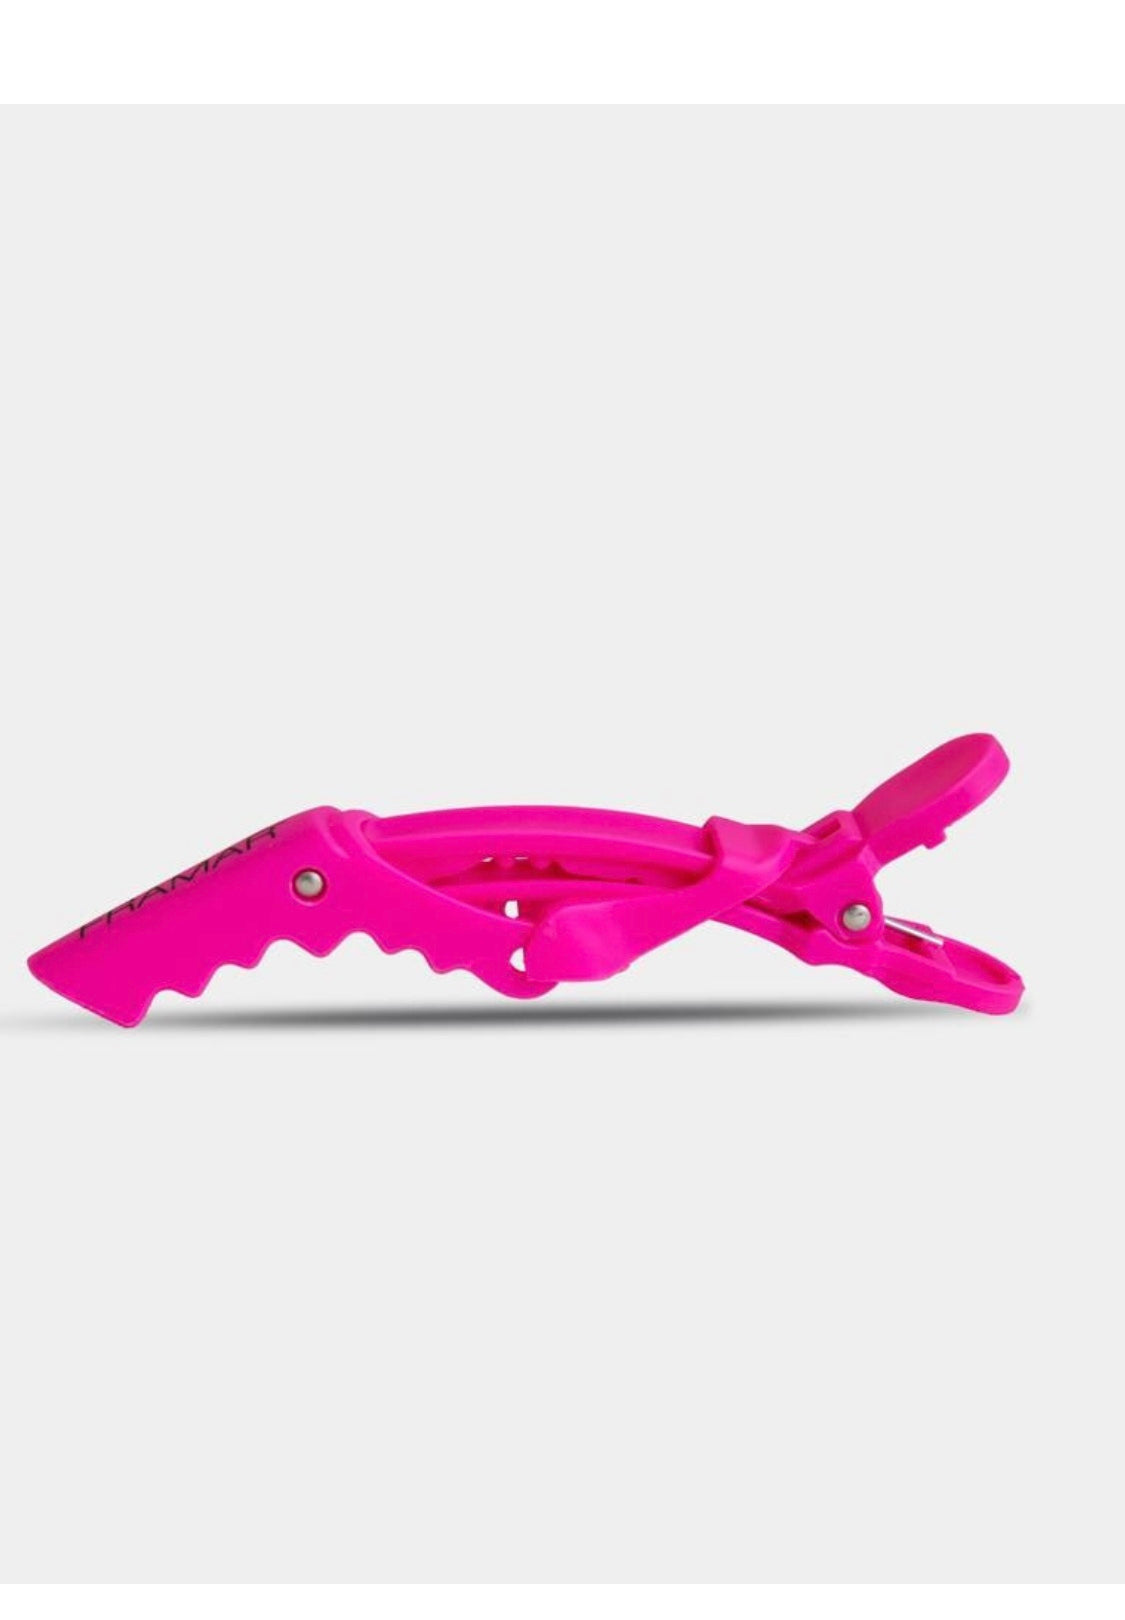 Framar - Jaw clips pink 4 pack